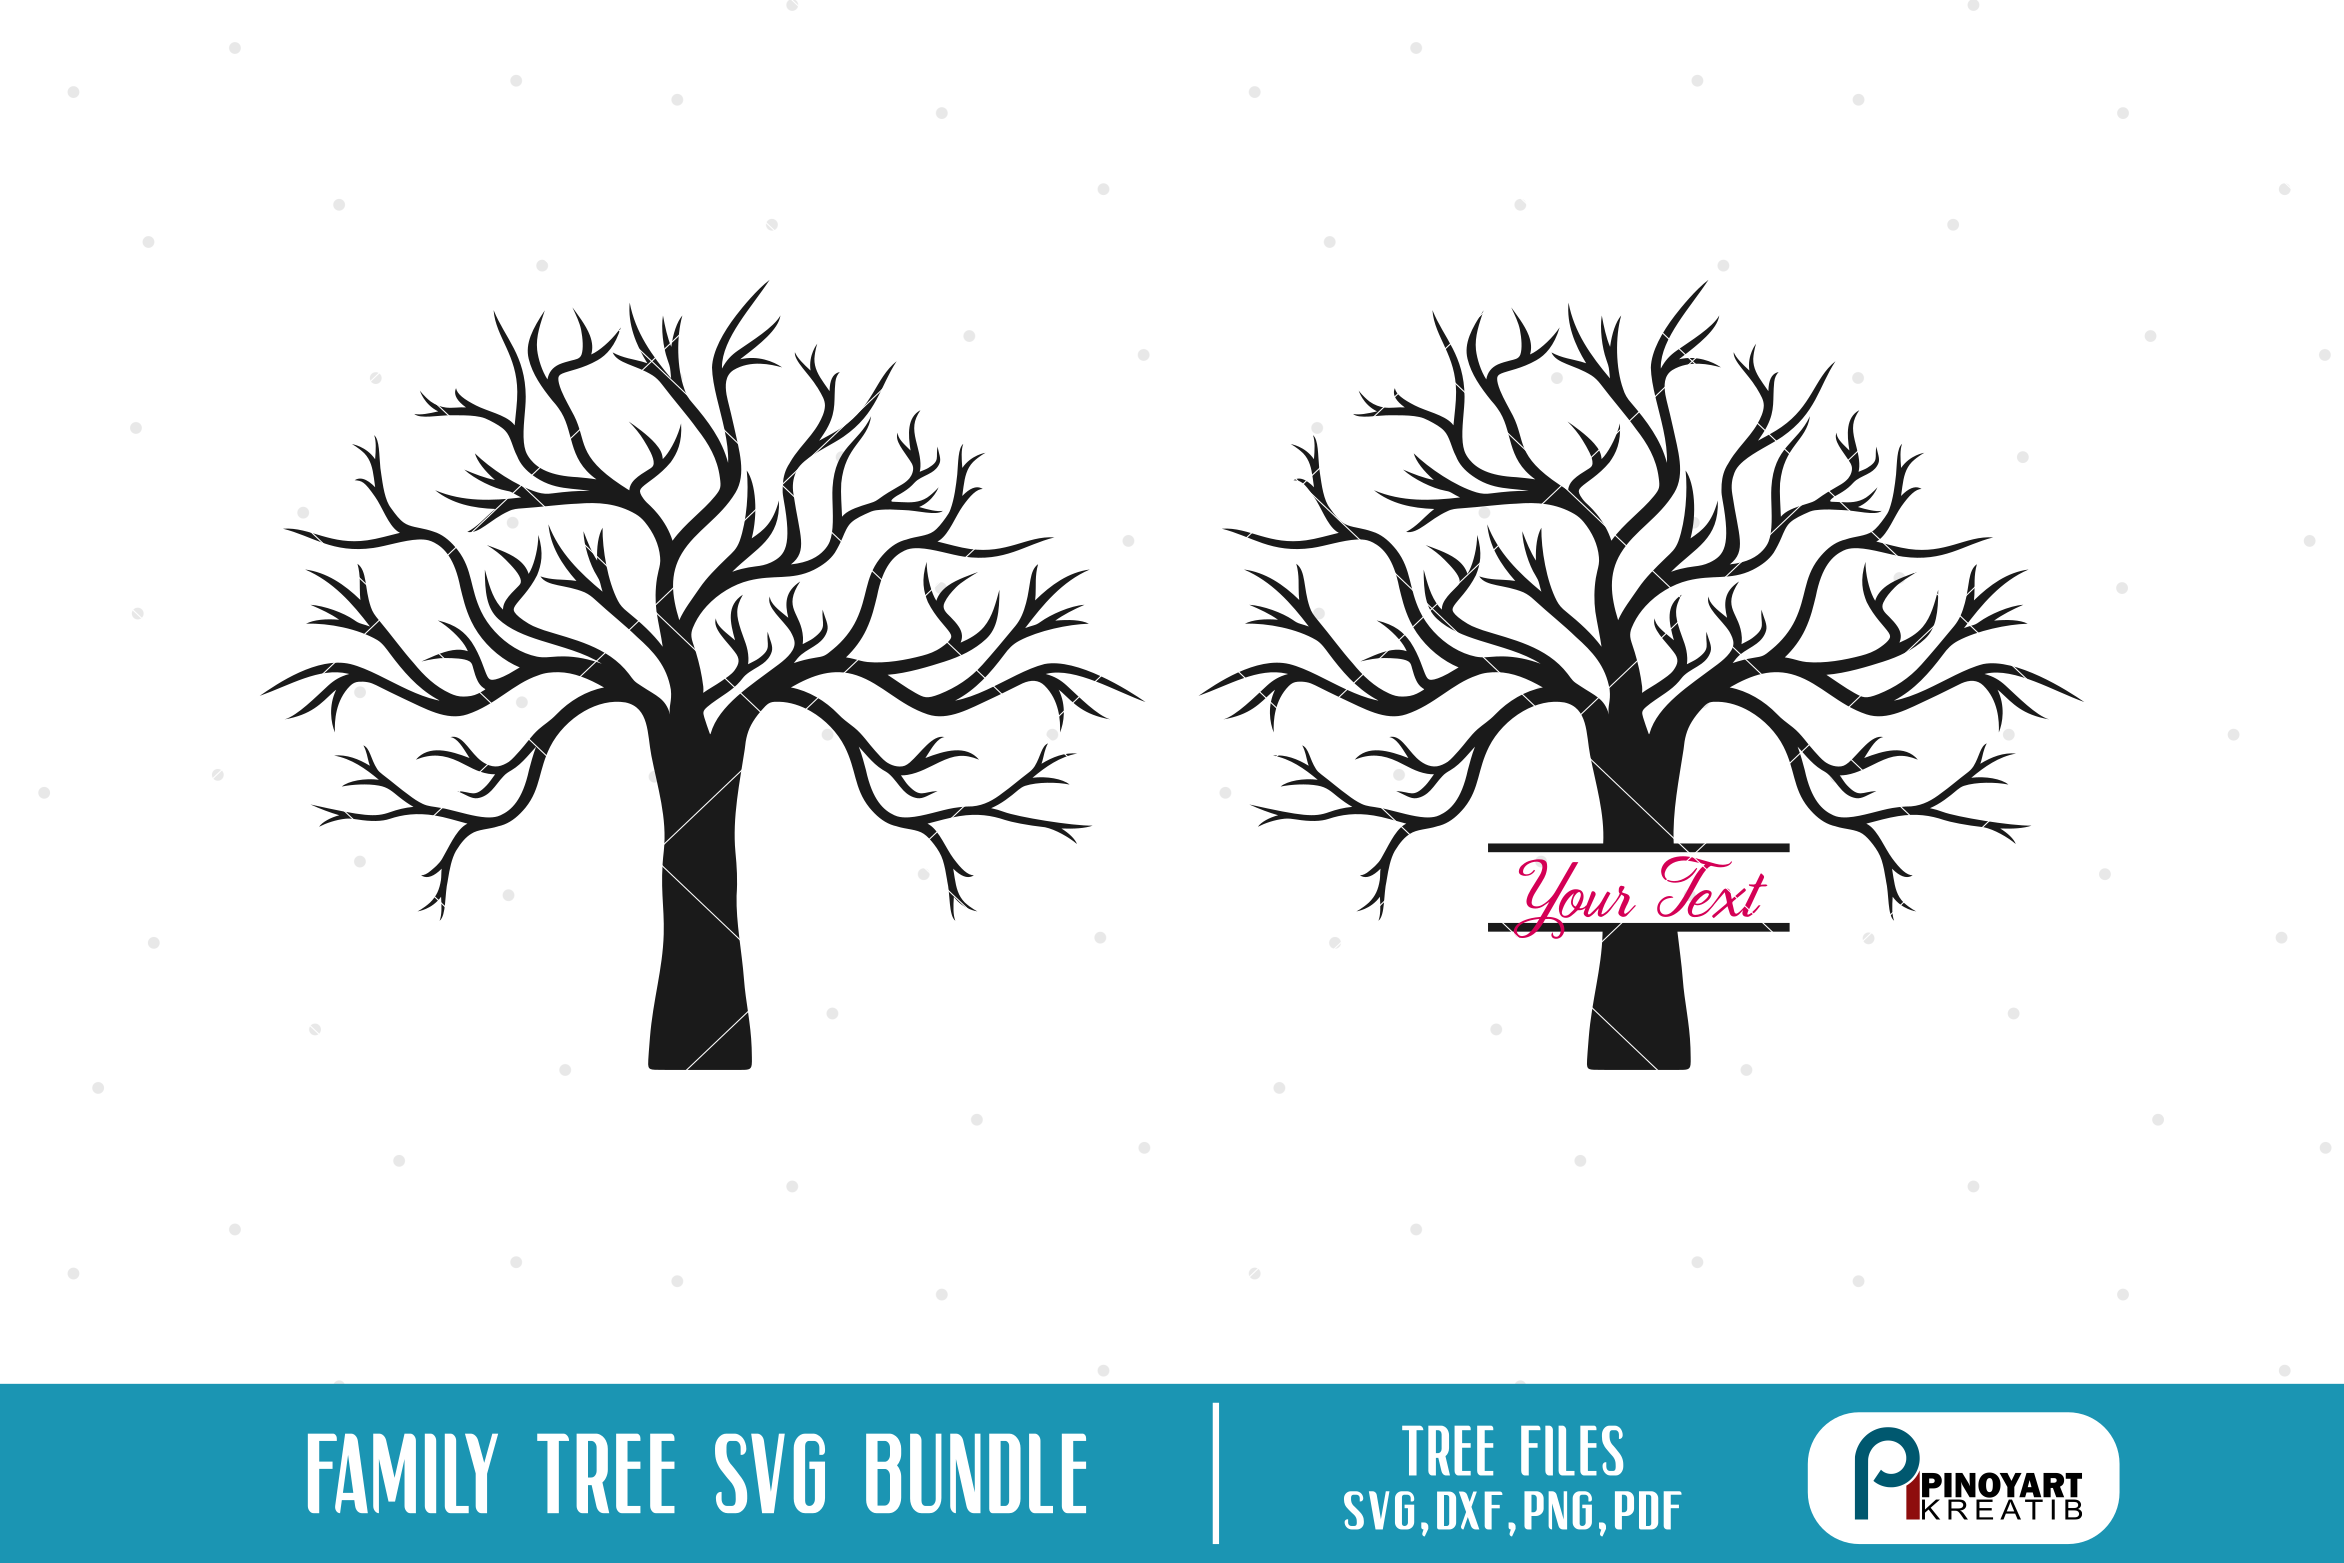 Download Family Tree Svg Free 13 Kids : Family tree svg free file CHEAPEST ON ETSY cheap love ... : Click ...